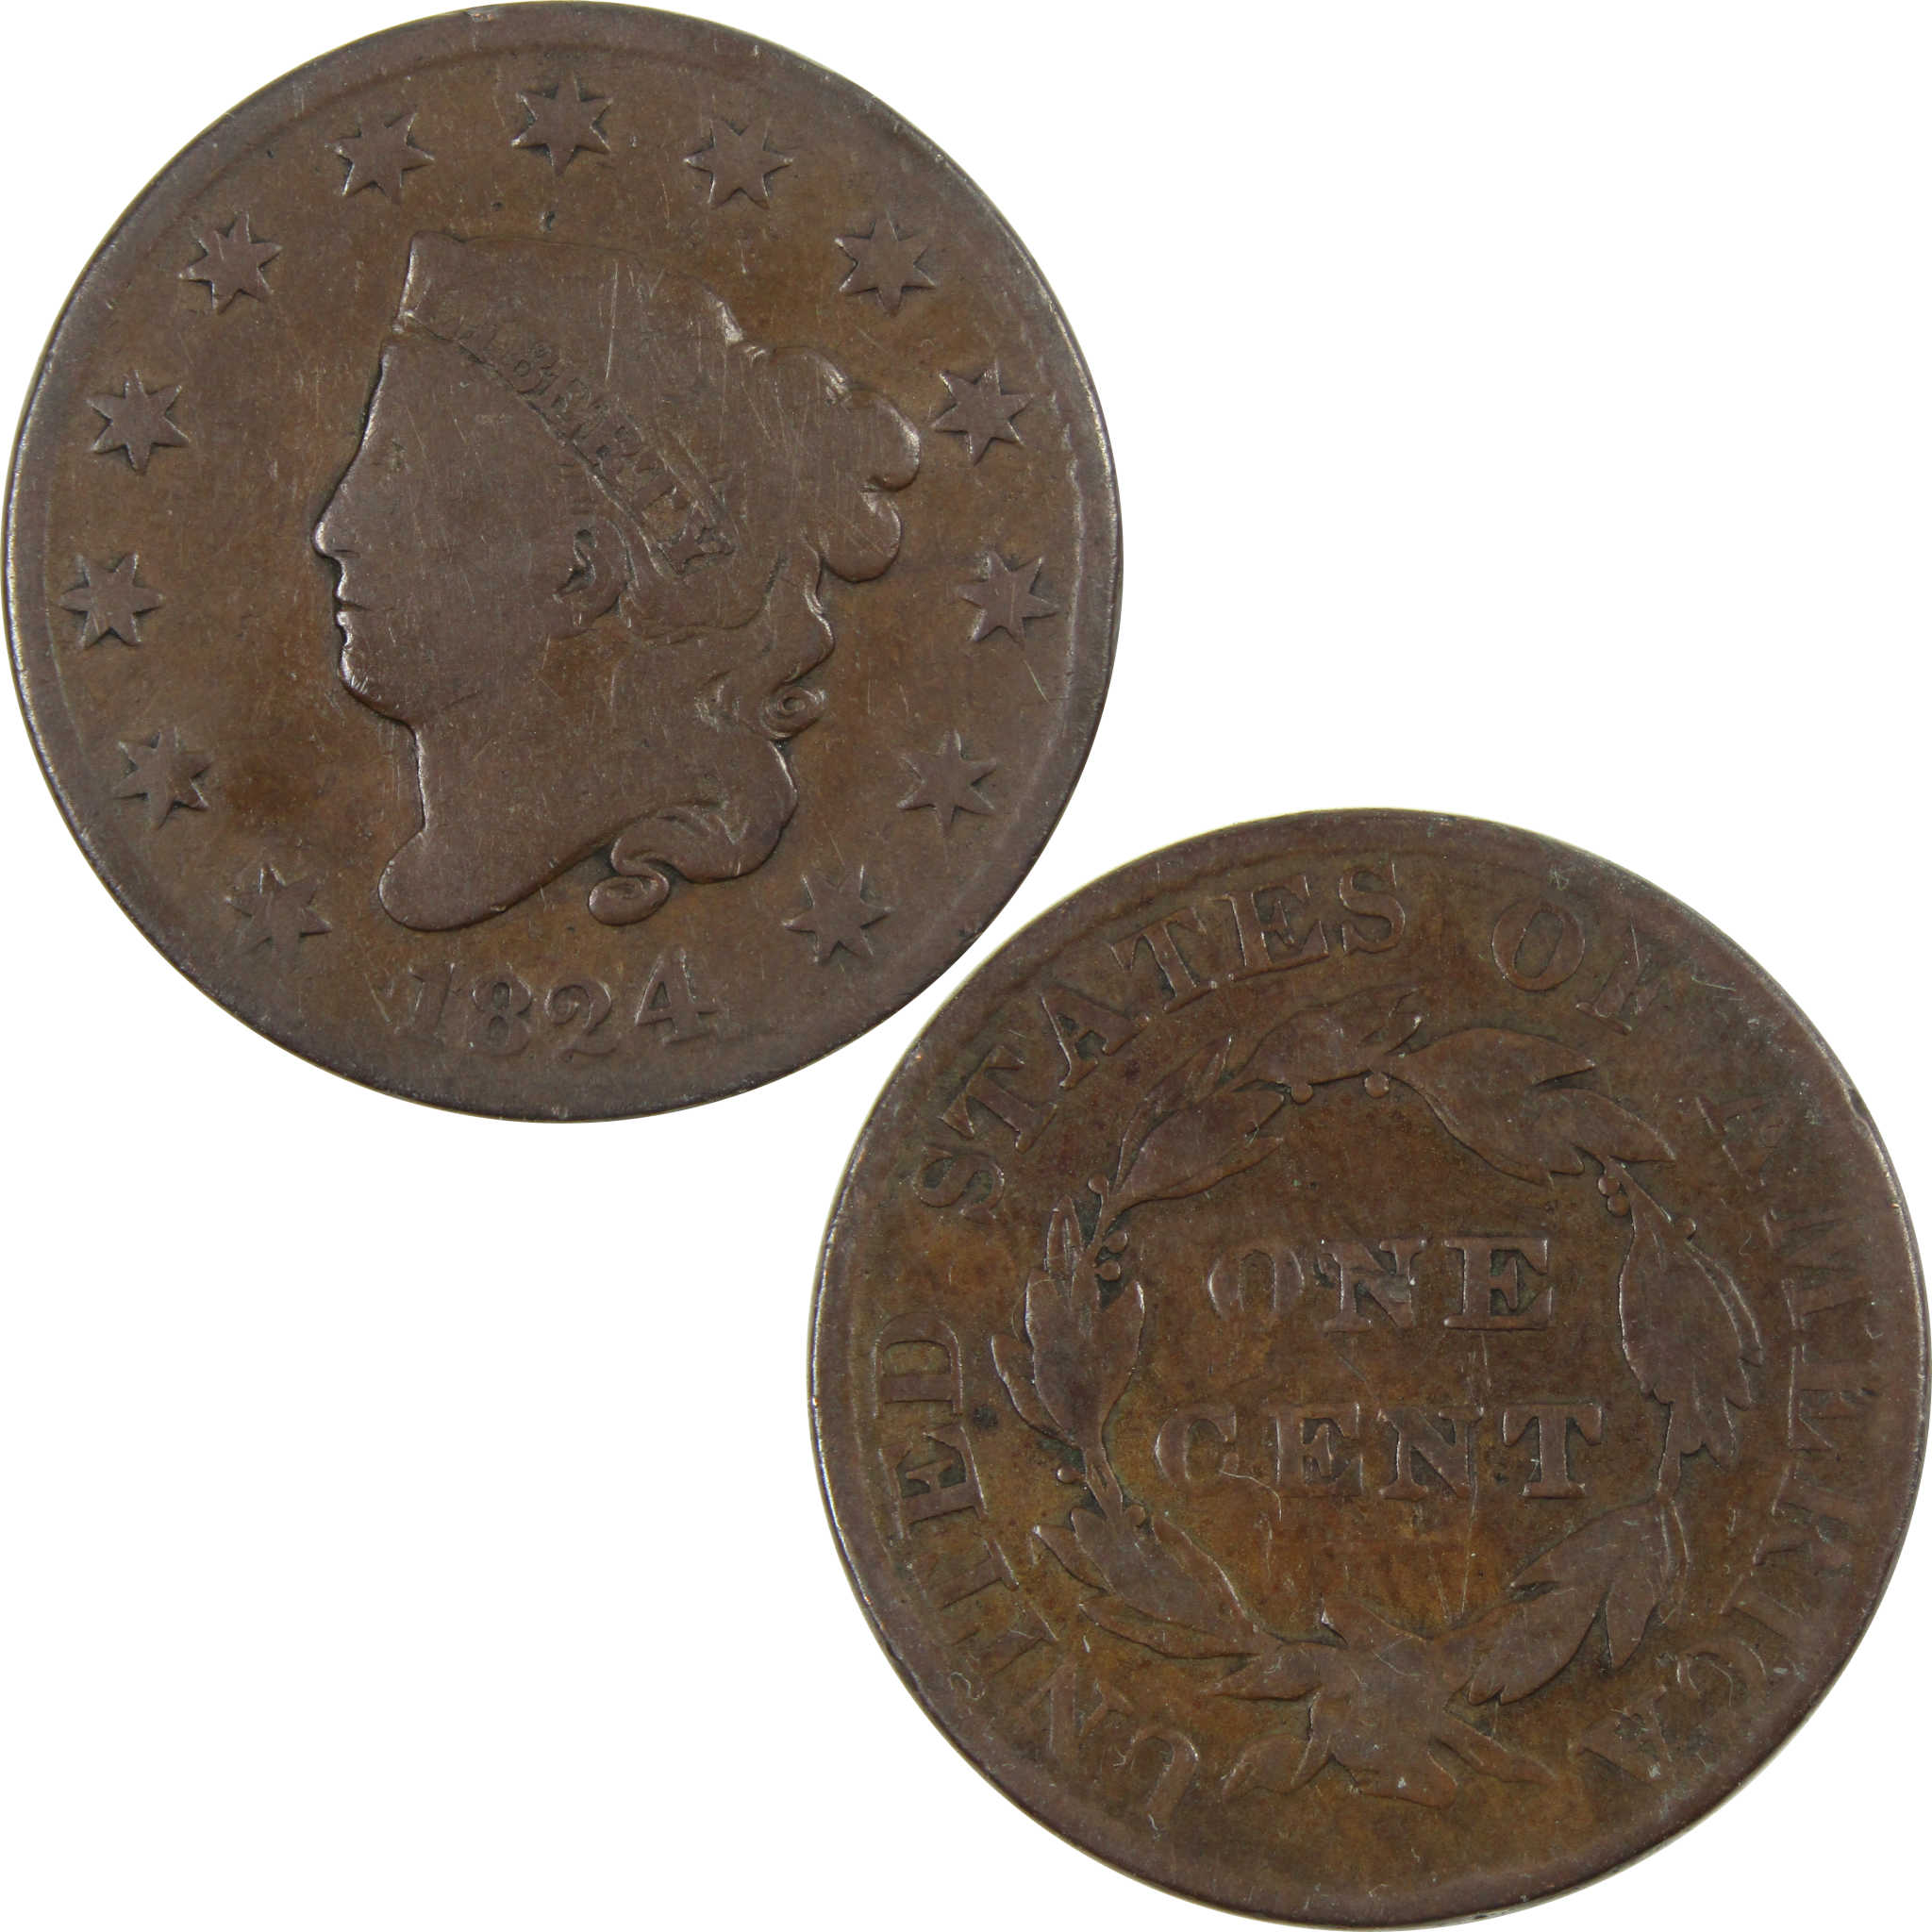 1824 Coronet Head Large Cent VG Very Good Copper Penny Coin SKU:I4462